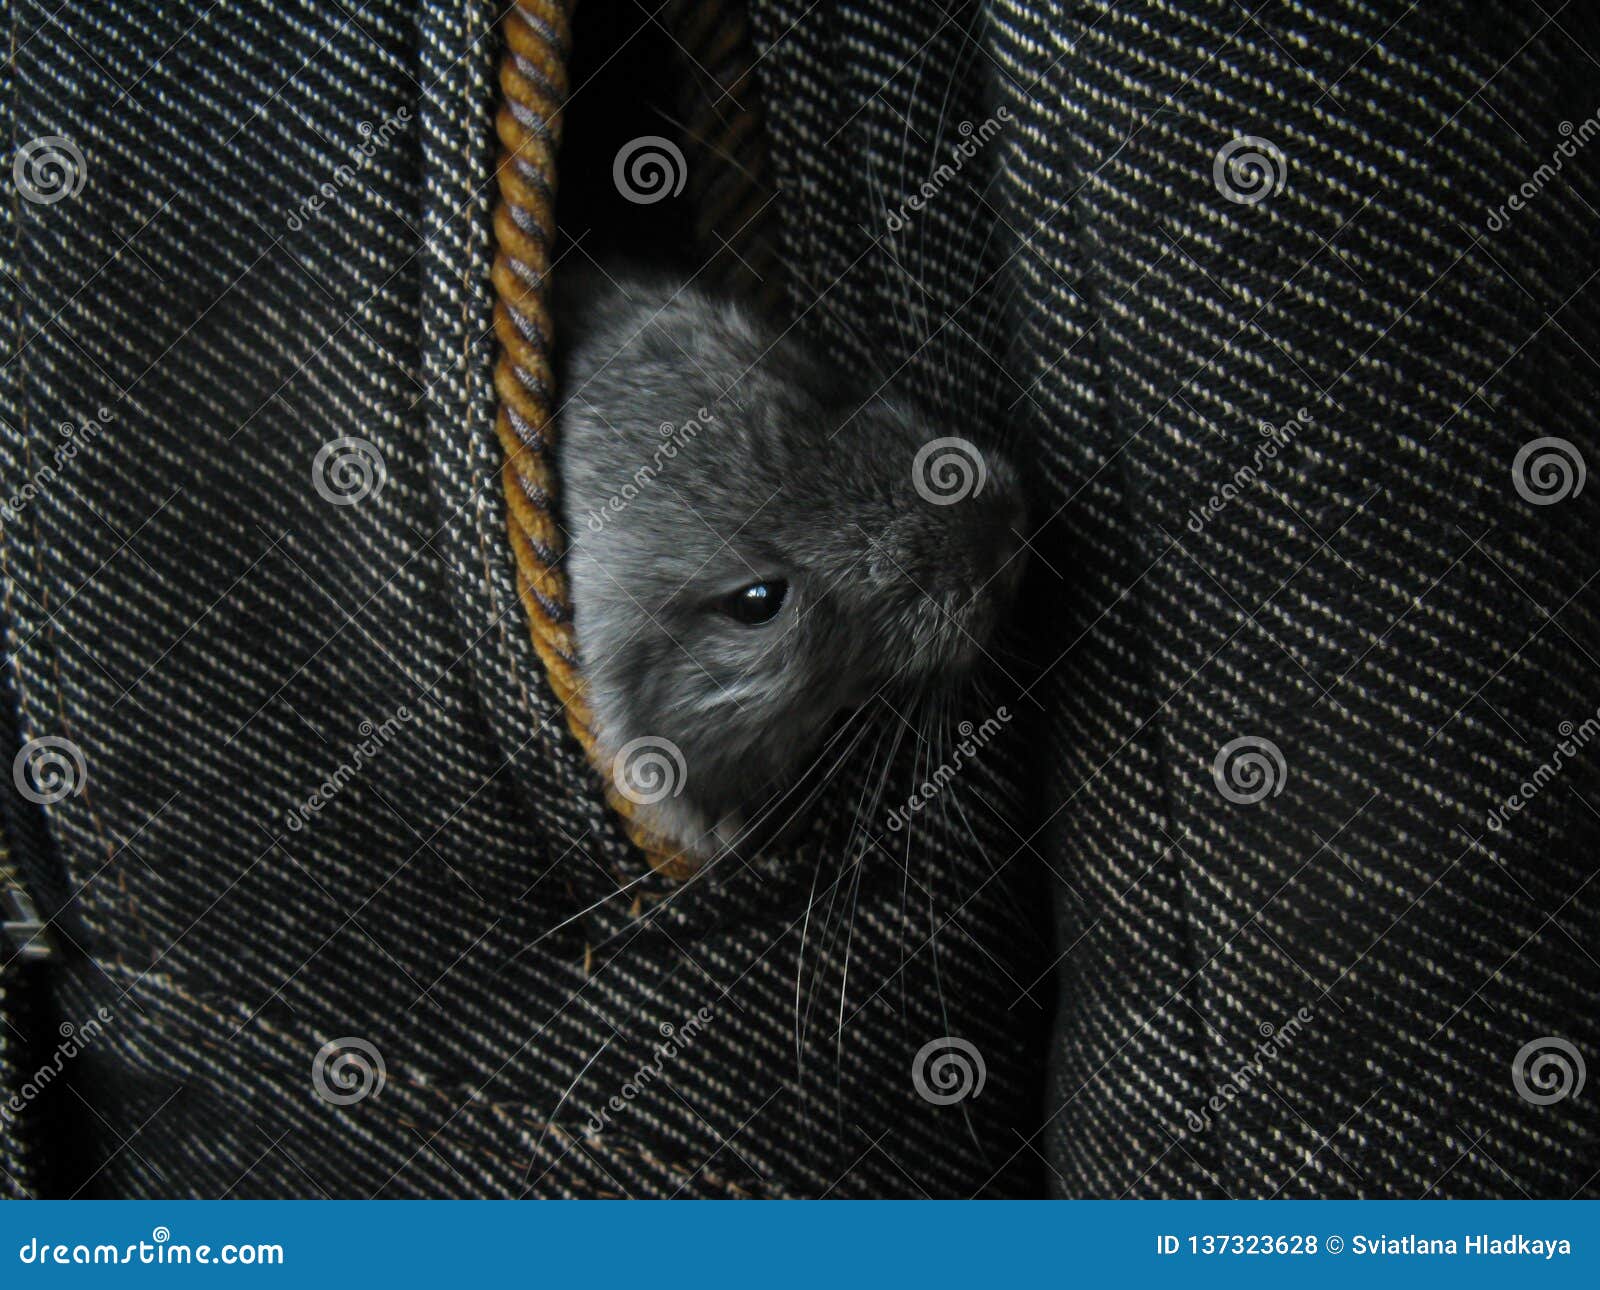 ittle gray newborn chinchillas look out of coat pocket